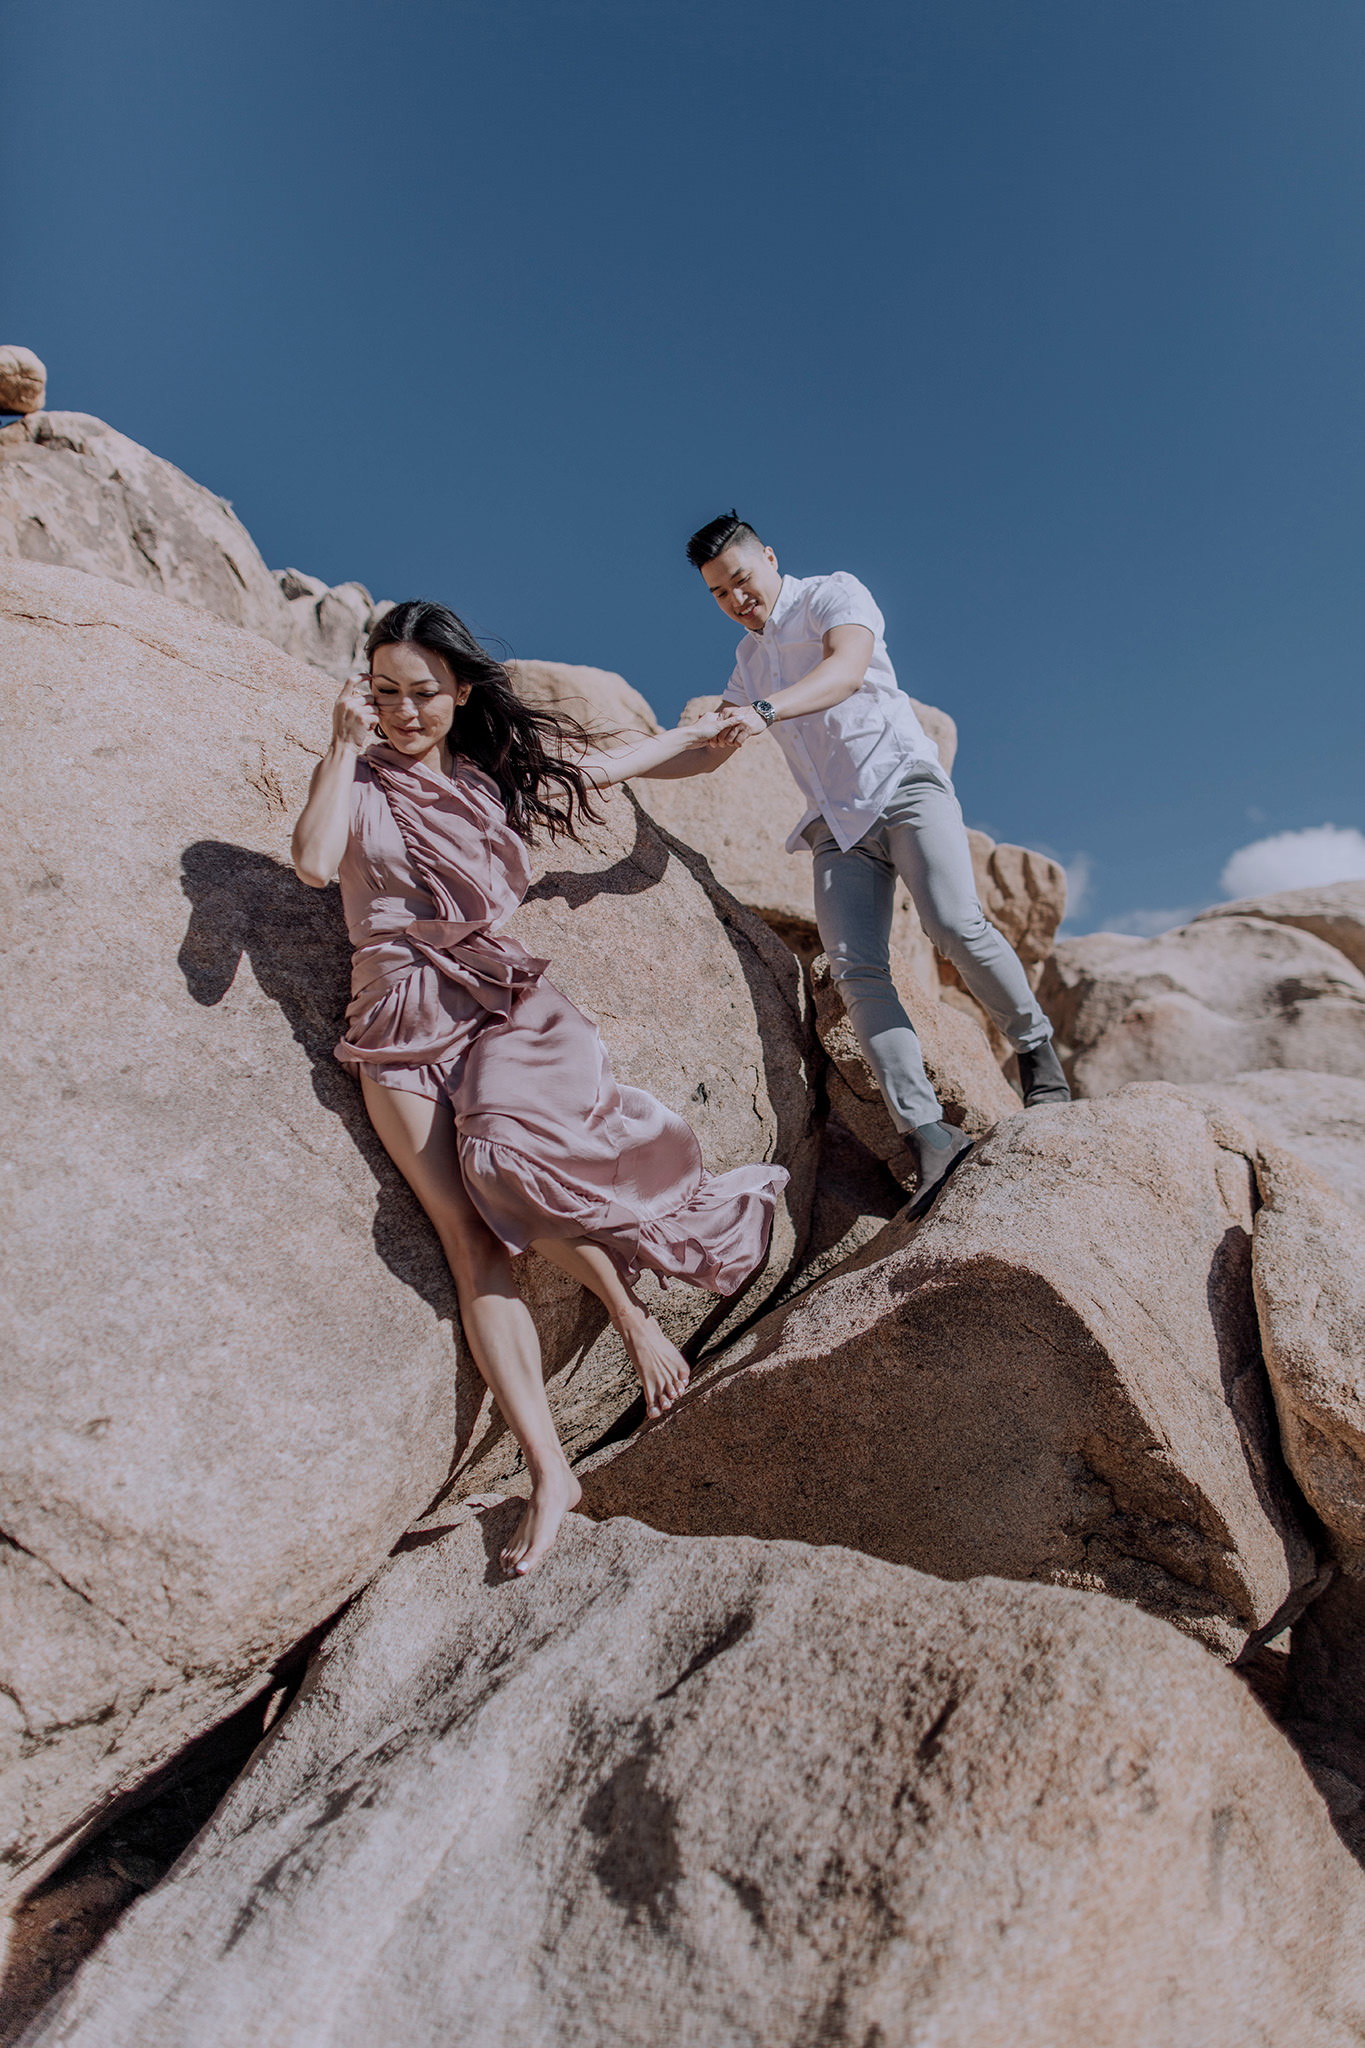 The engaged couple are walking down the big rocks. Engagement image by Jenny Fu Studio